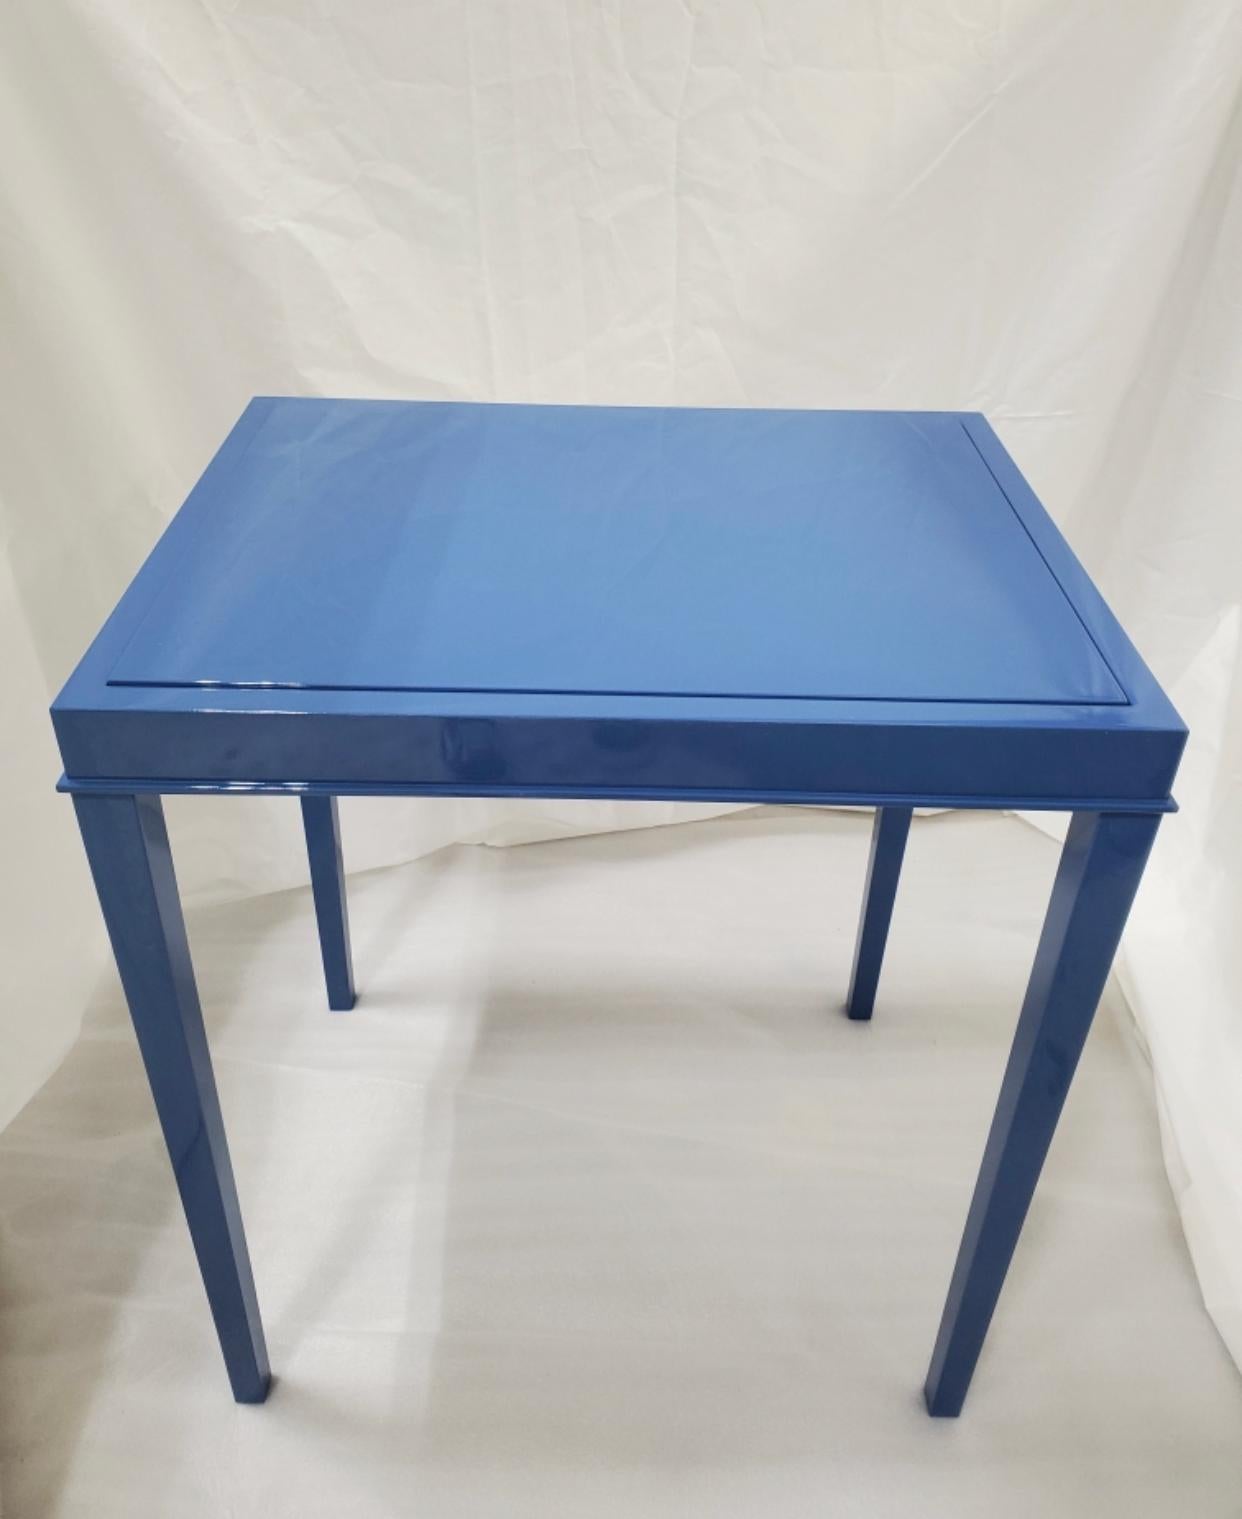 Lacquer blue table that coverts to a backgammon game table.
New production. Designed and made in NYC, each table is handcrafted within NYC and has unique attributes. One-day delivery available in NYC.
 
 